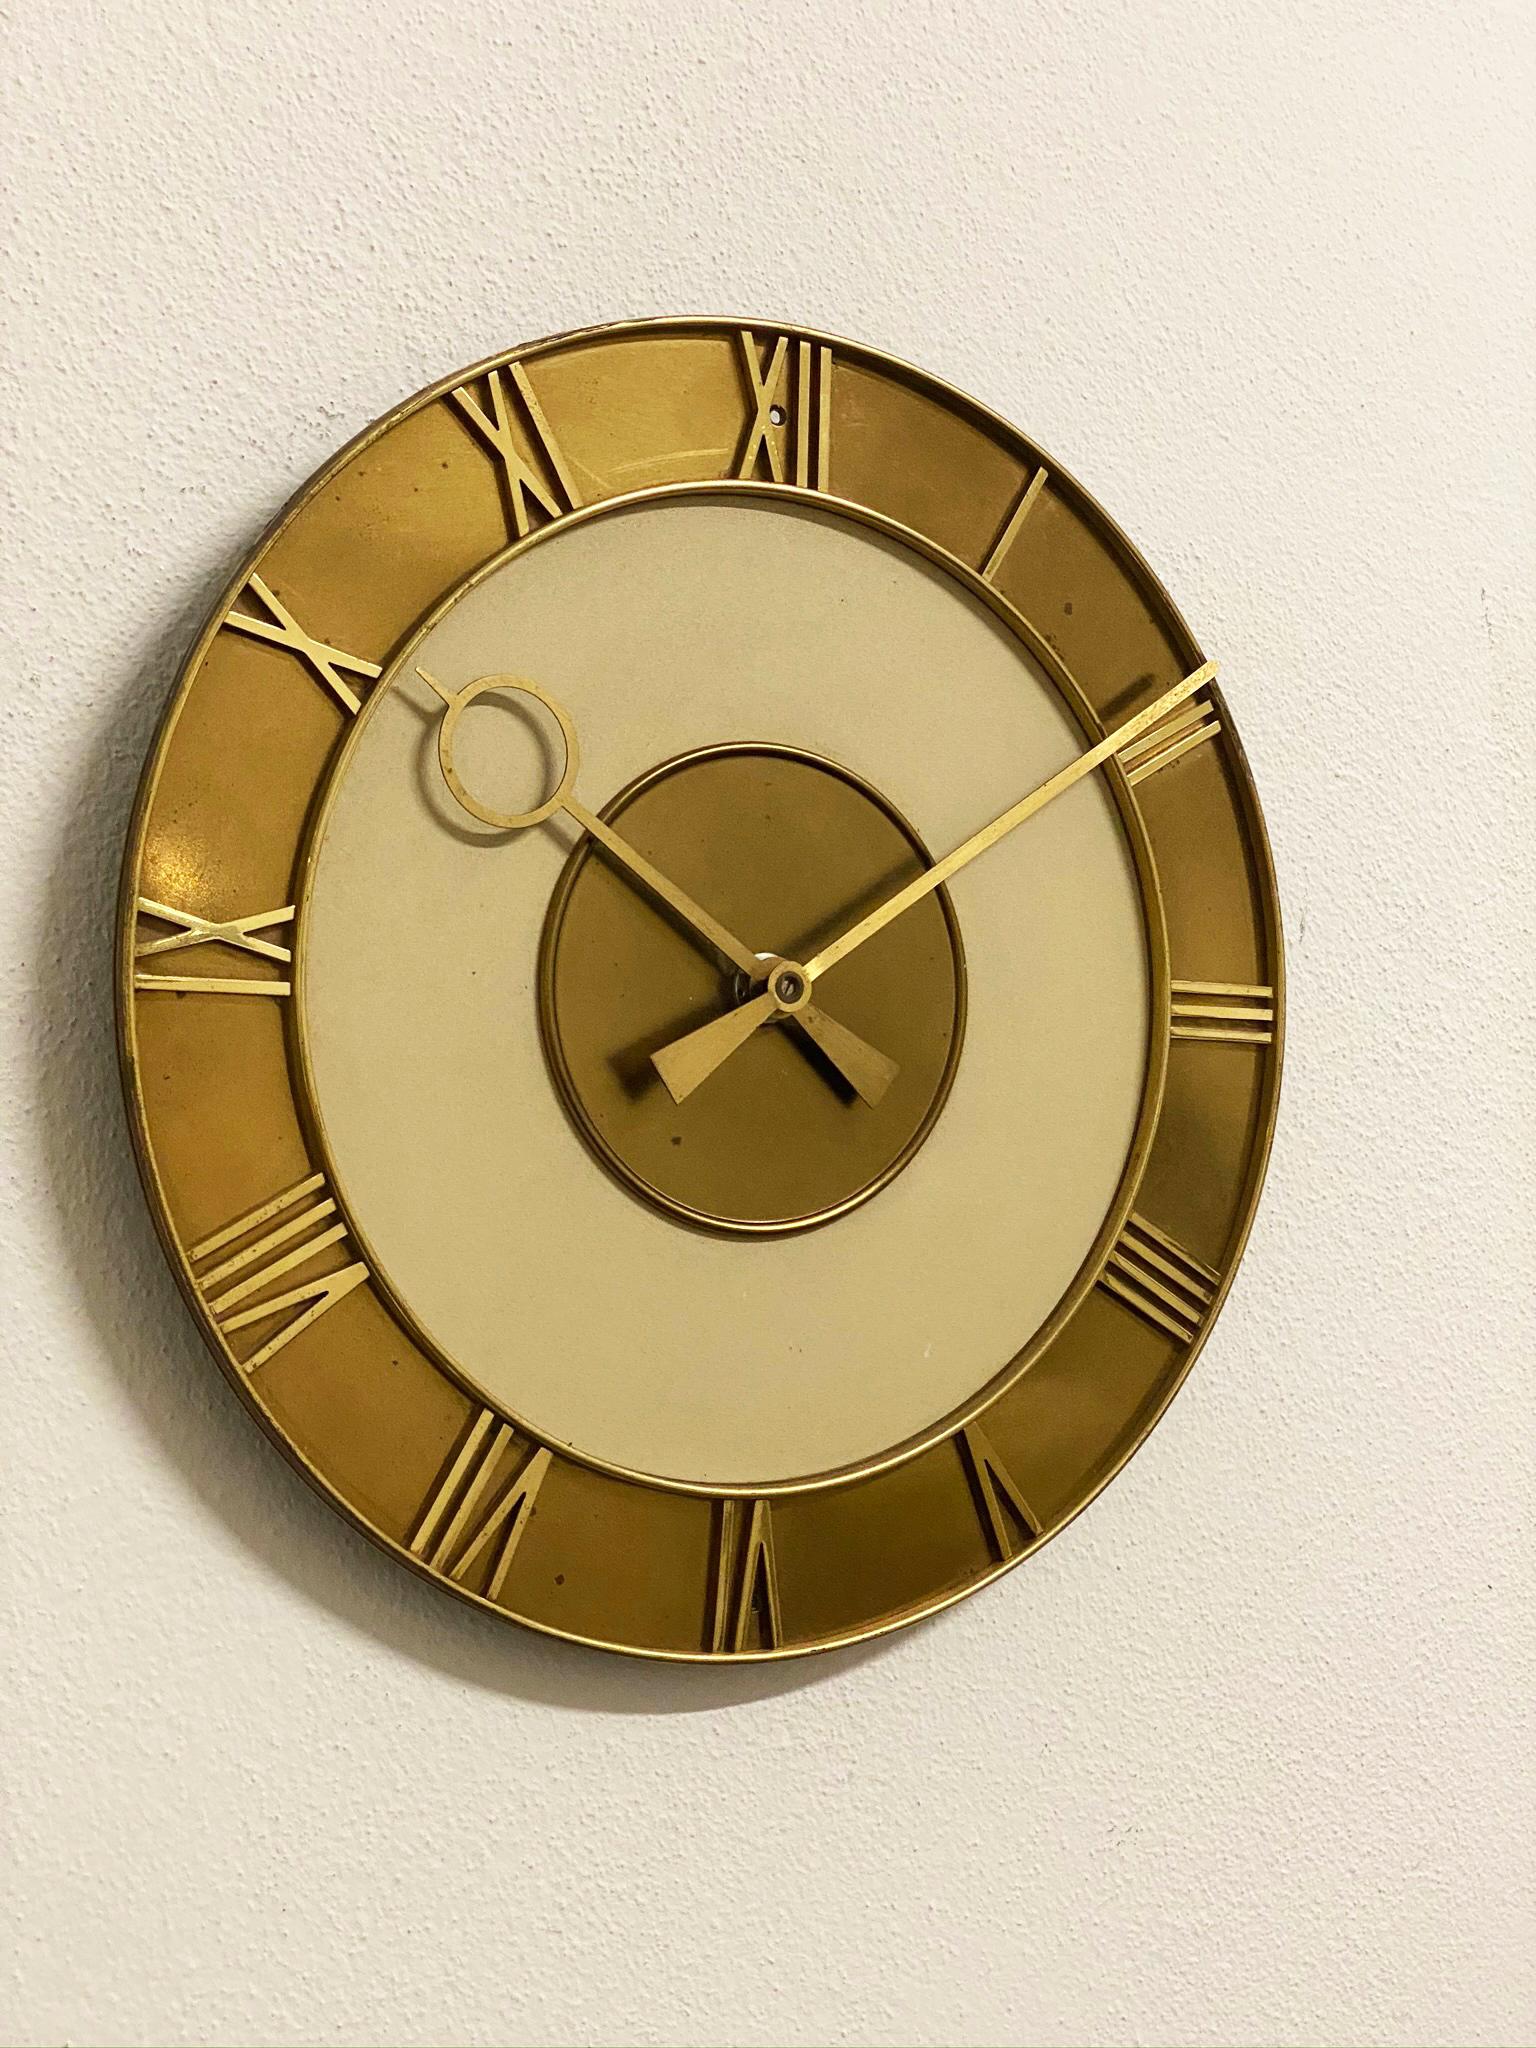 Steel painted with brass roman digits made in Germany in the late 1950s.
Formerly a slave clock, it is now fitted with a modern quartz movement with a battery.
Delivery time about 2-3 weeks.